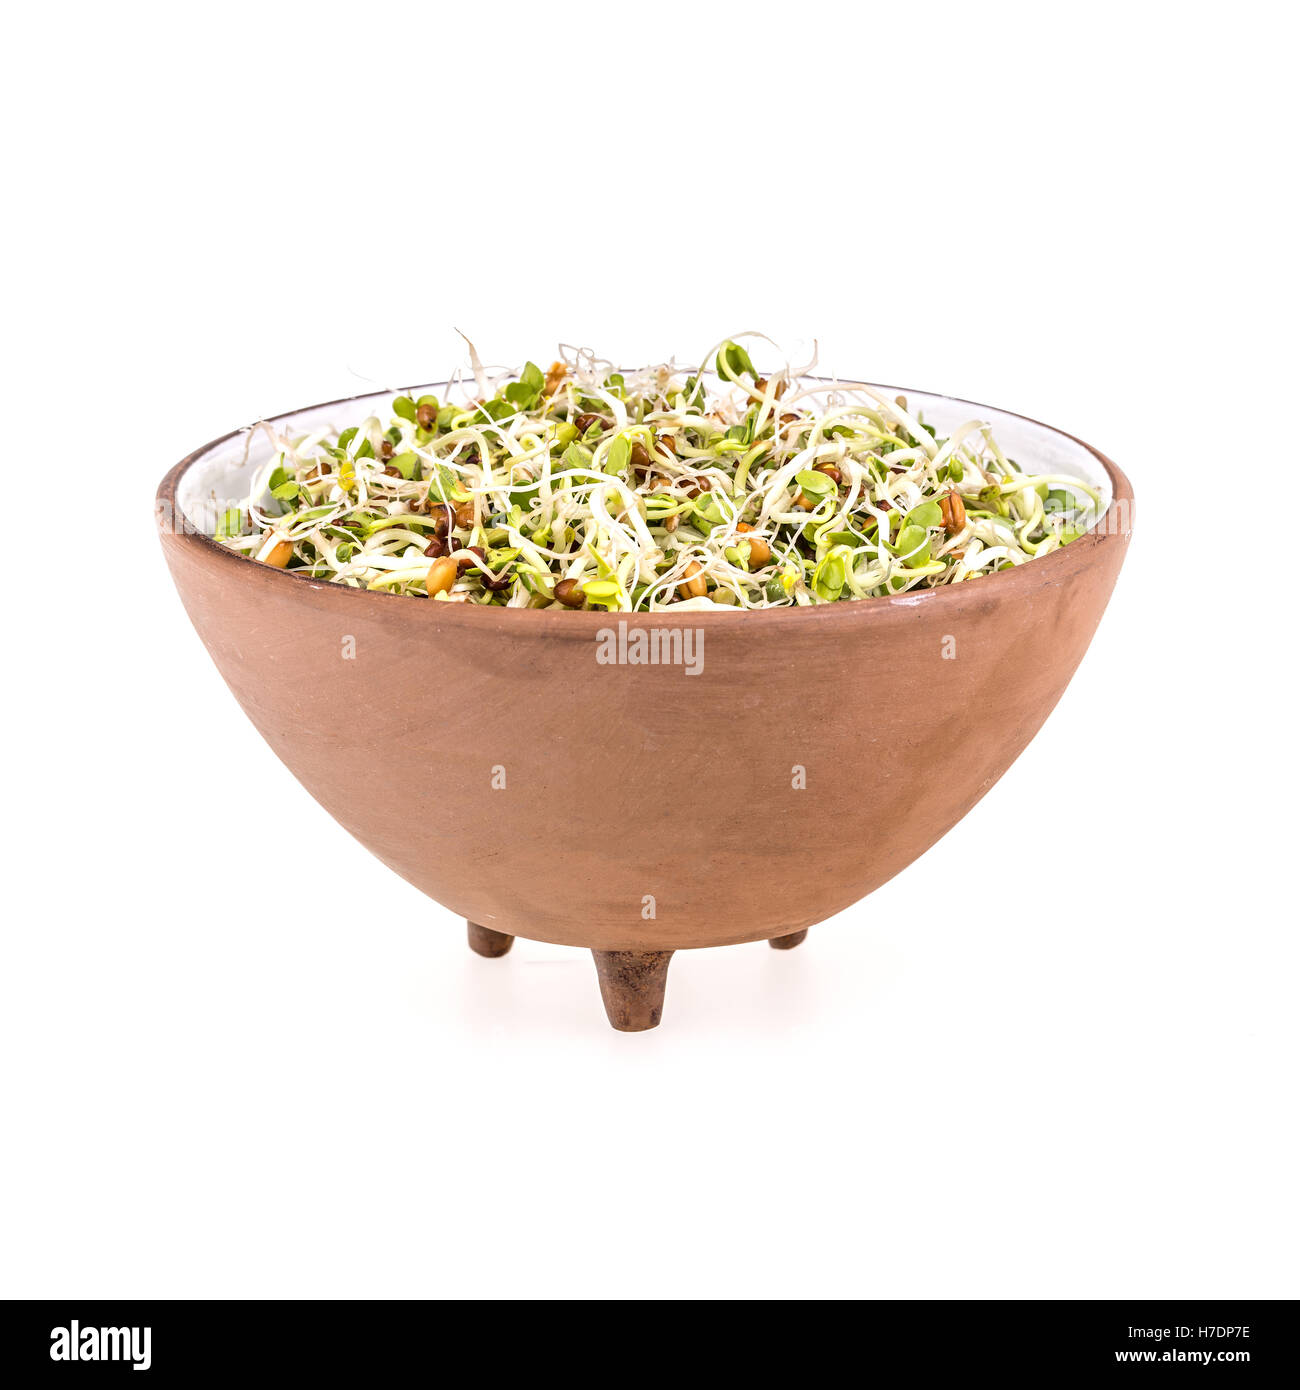 Sprouted seeds Stock Photo